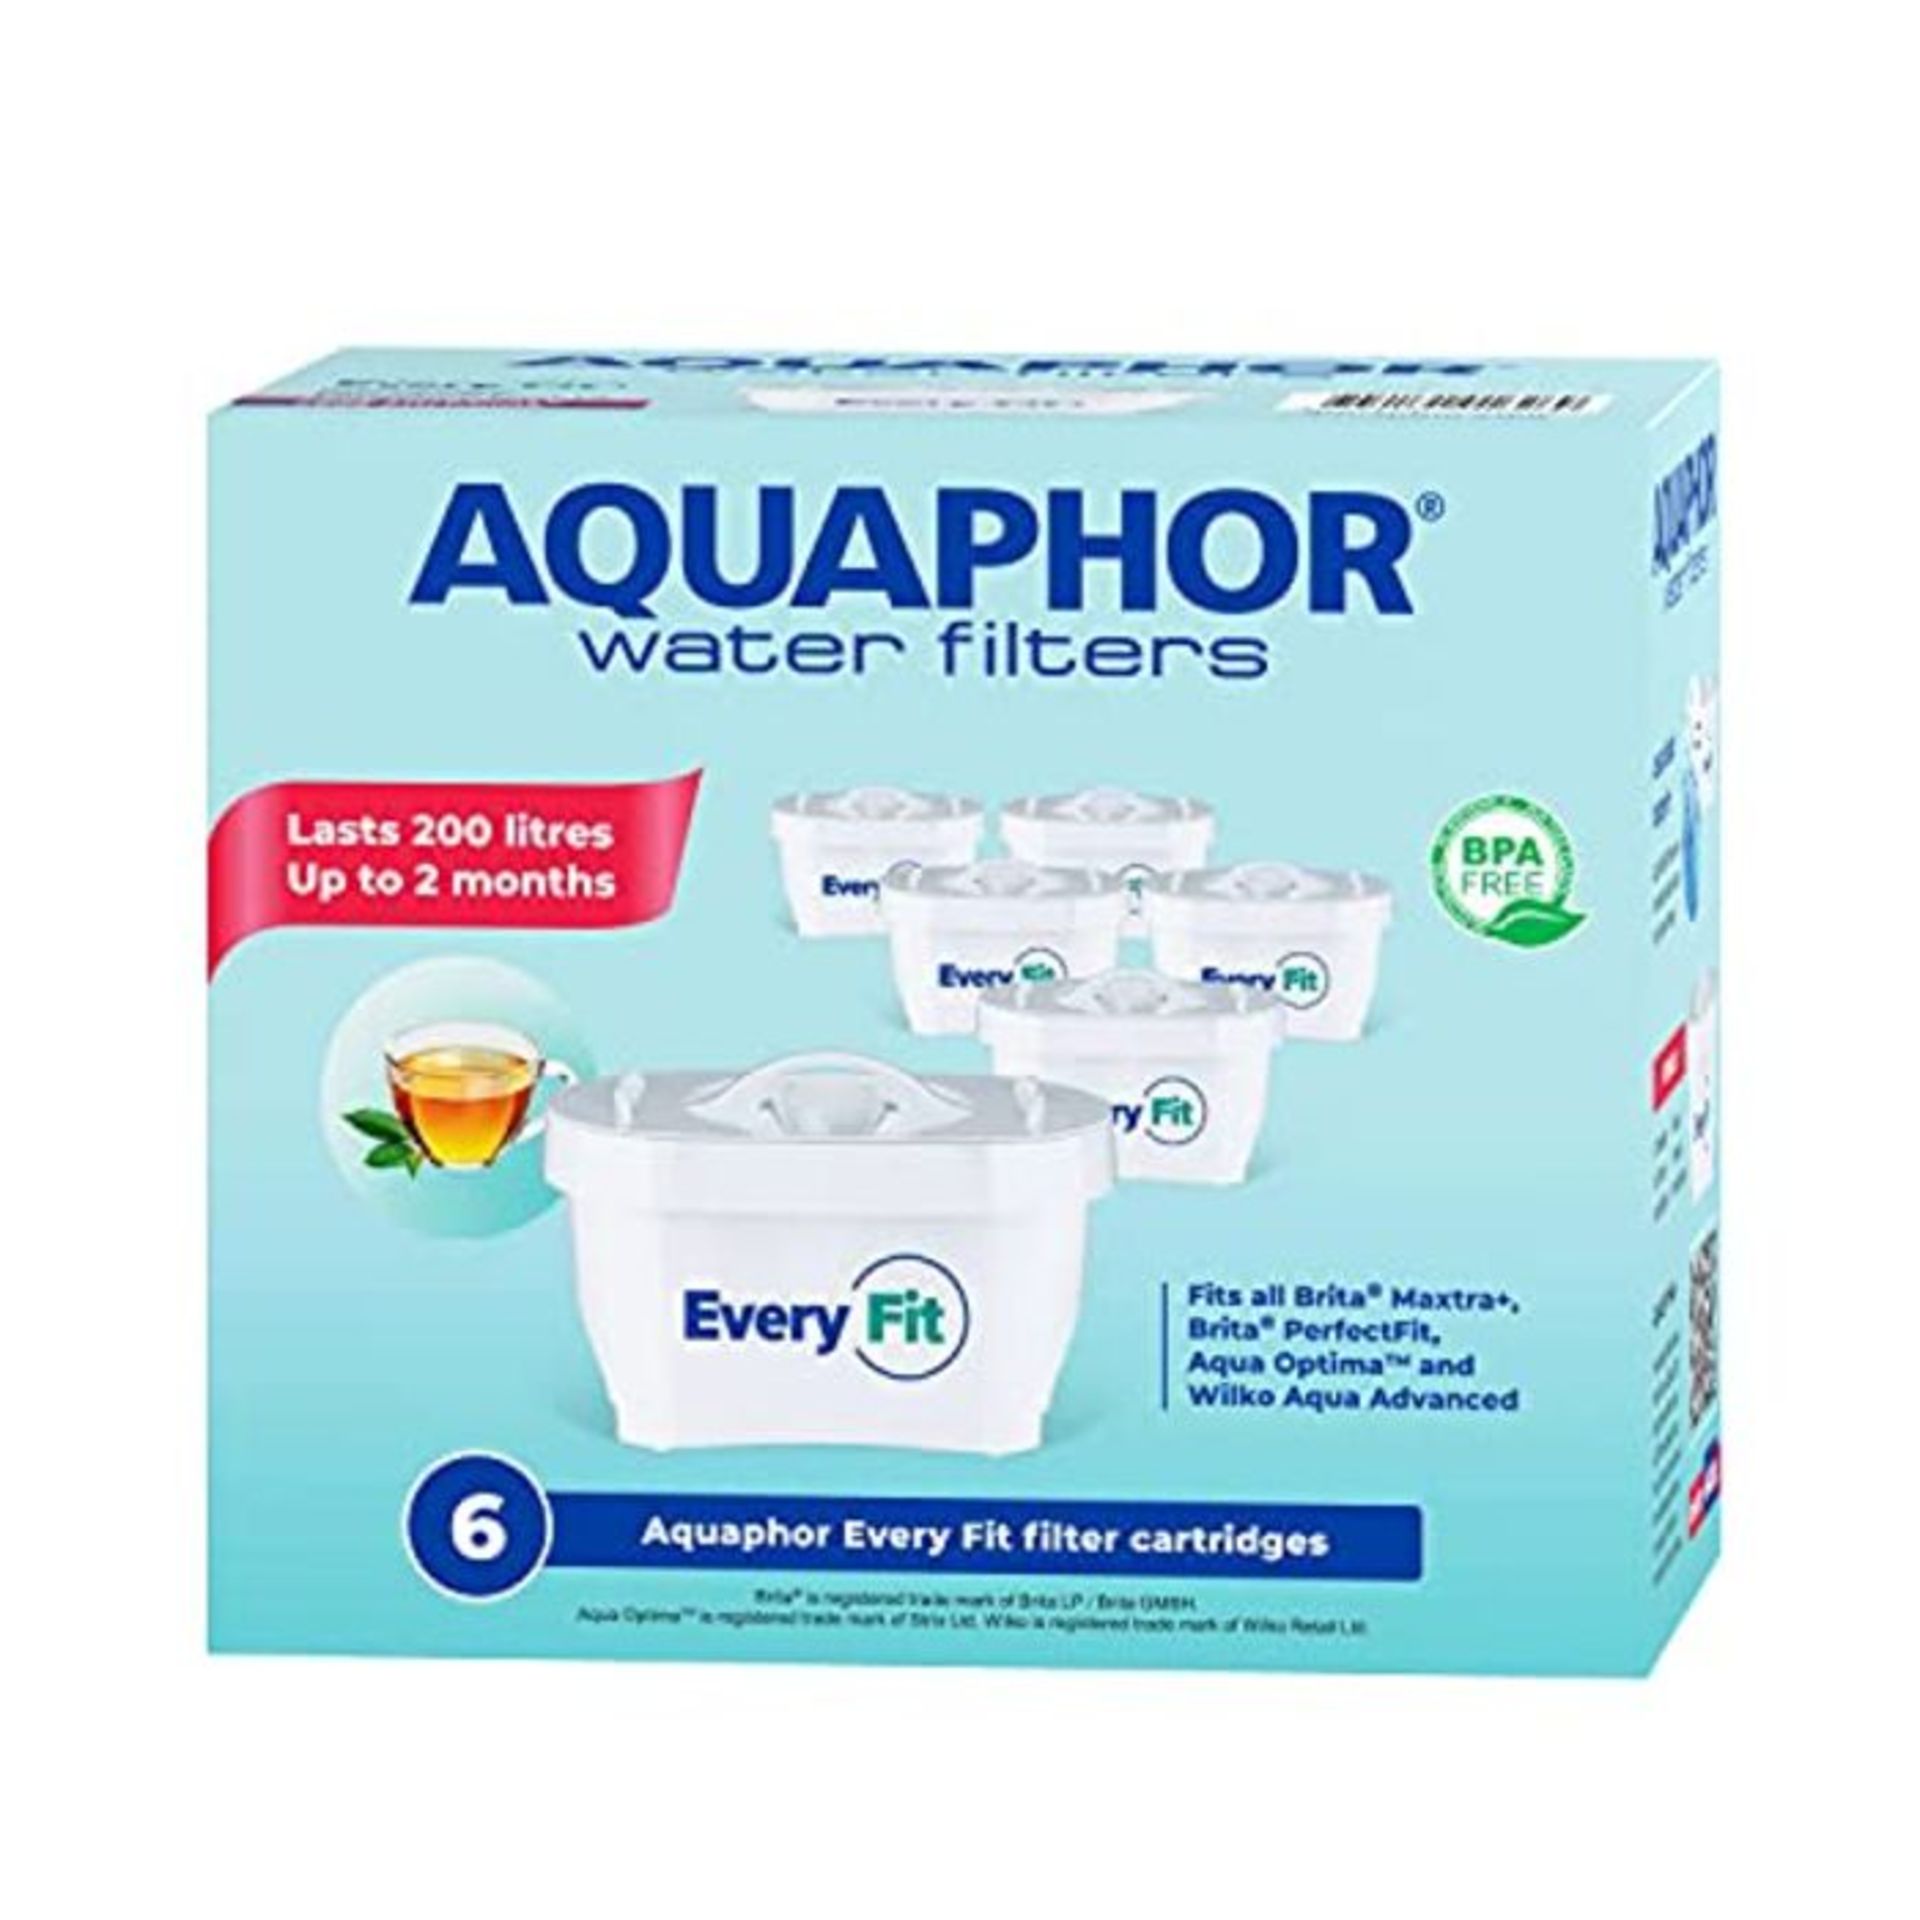 Aquaphor Every Fit Replacement Water Filter cartridges 6pack, FITS BRITA MAXTRA+ and A